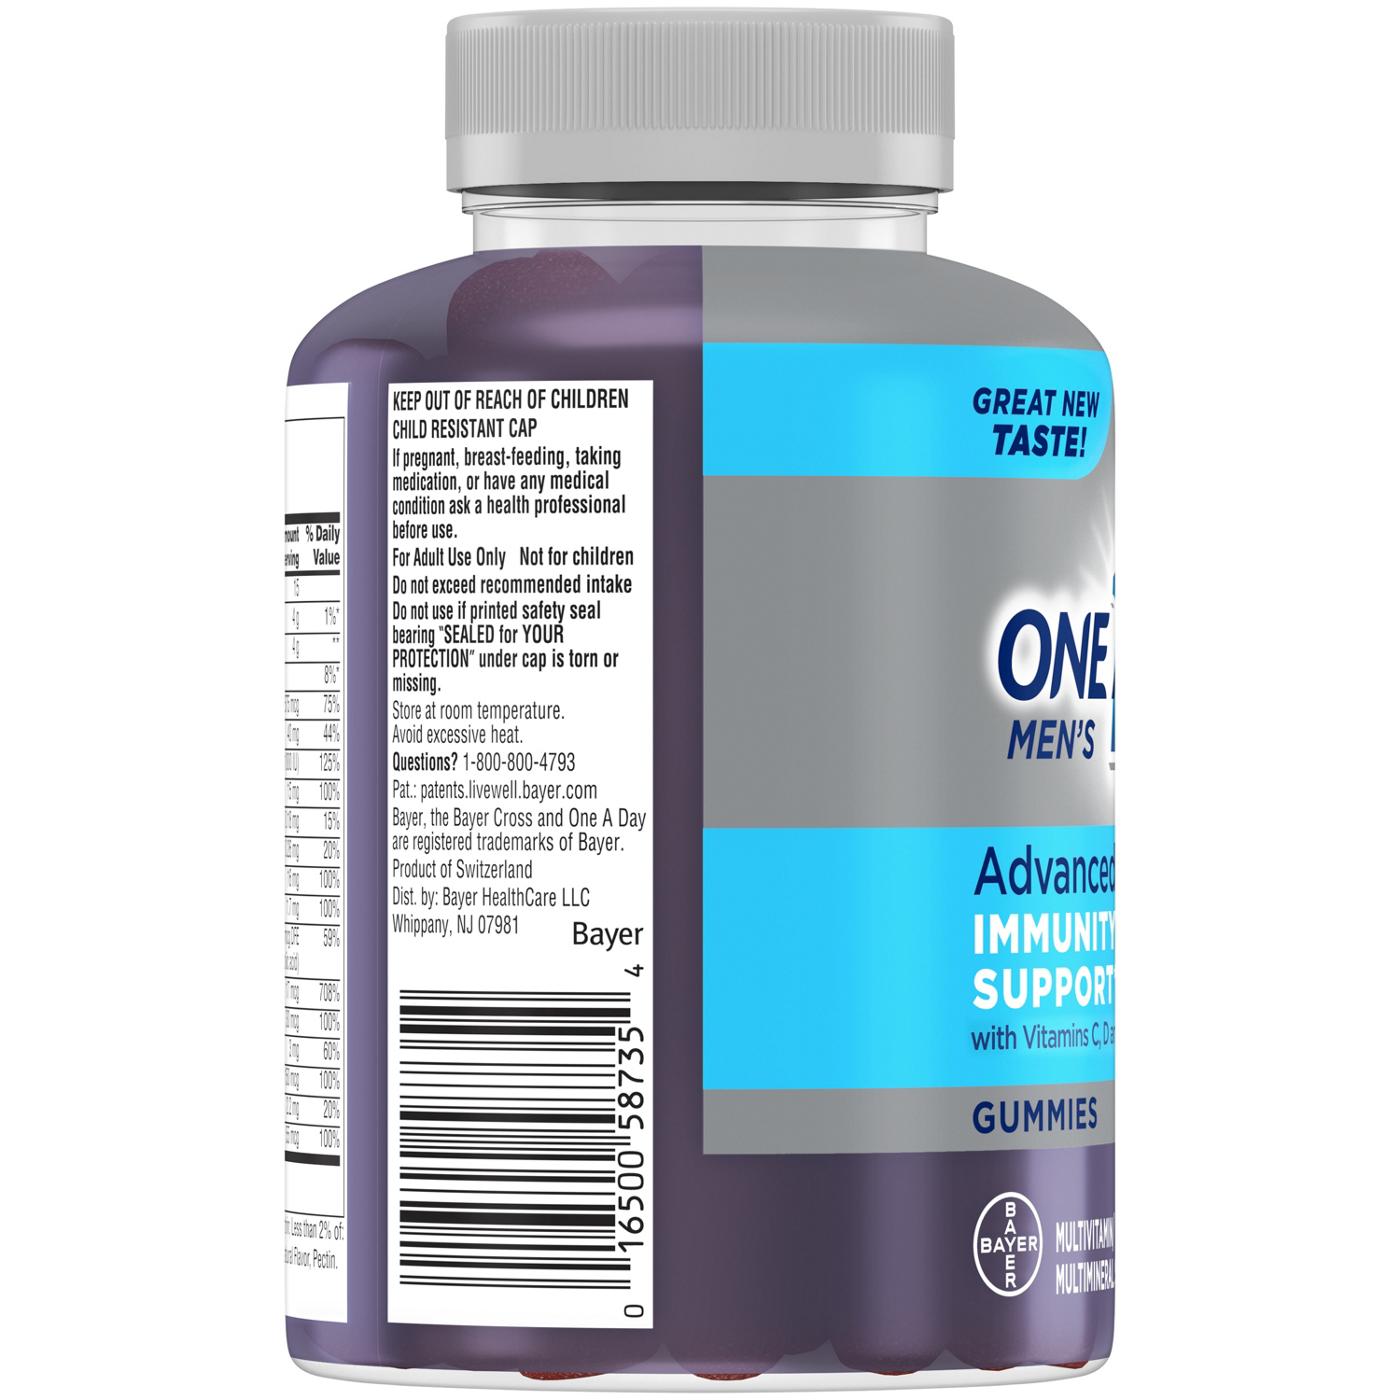 One A Day Men's 50+ Advanced Multivitamin Gummies; image 4 of 5